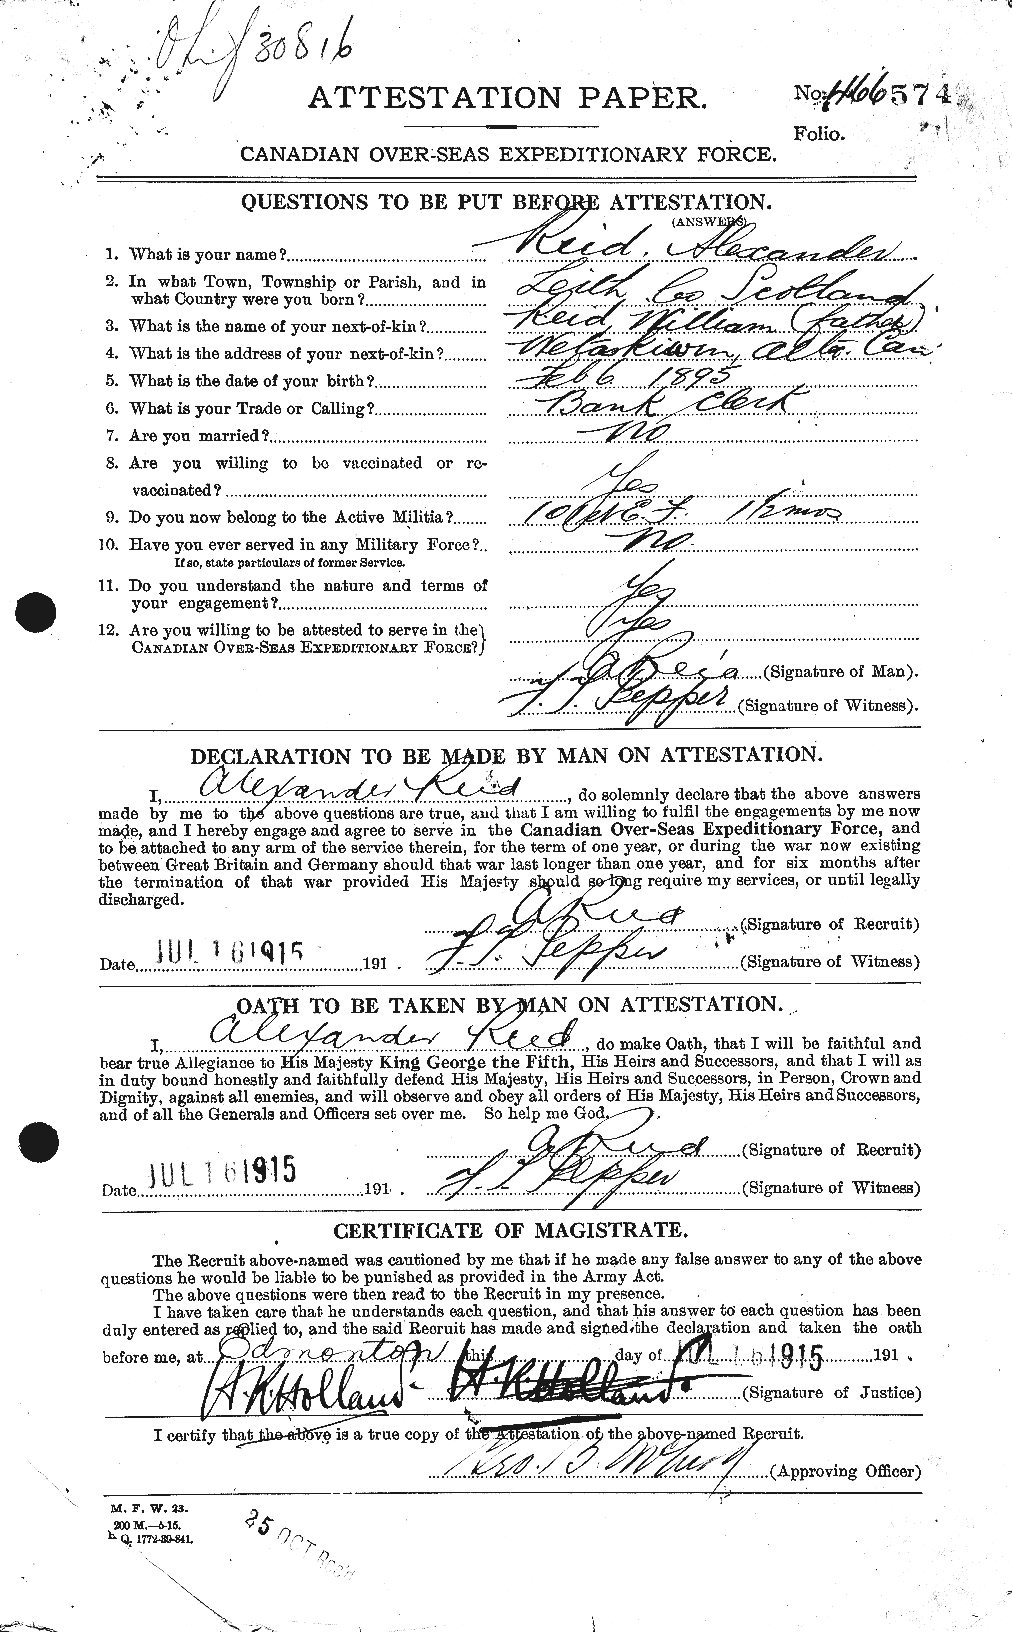 Personnel Records of the First World War - CEF 597770a